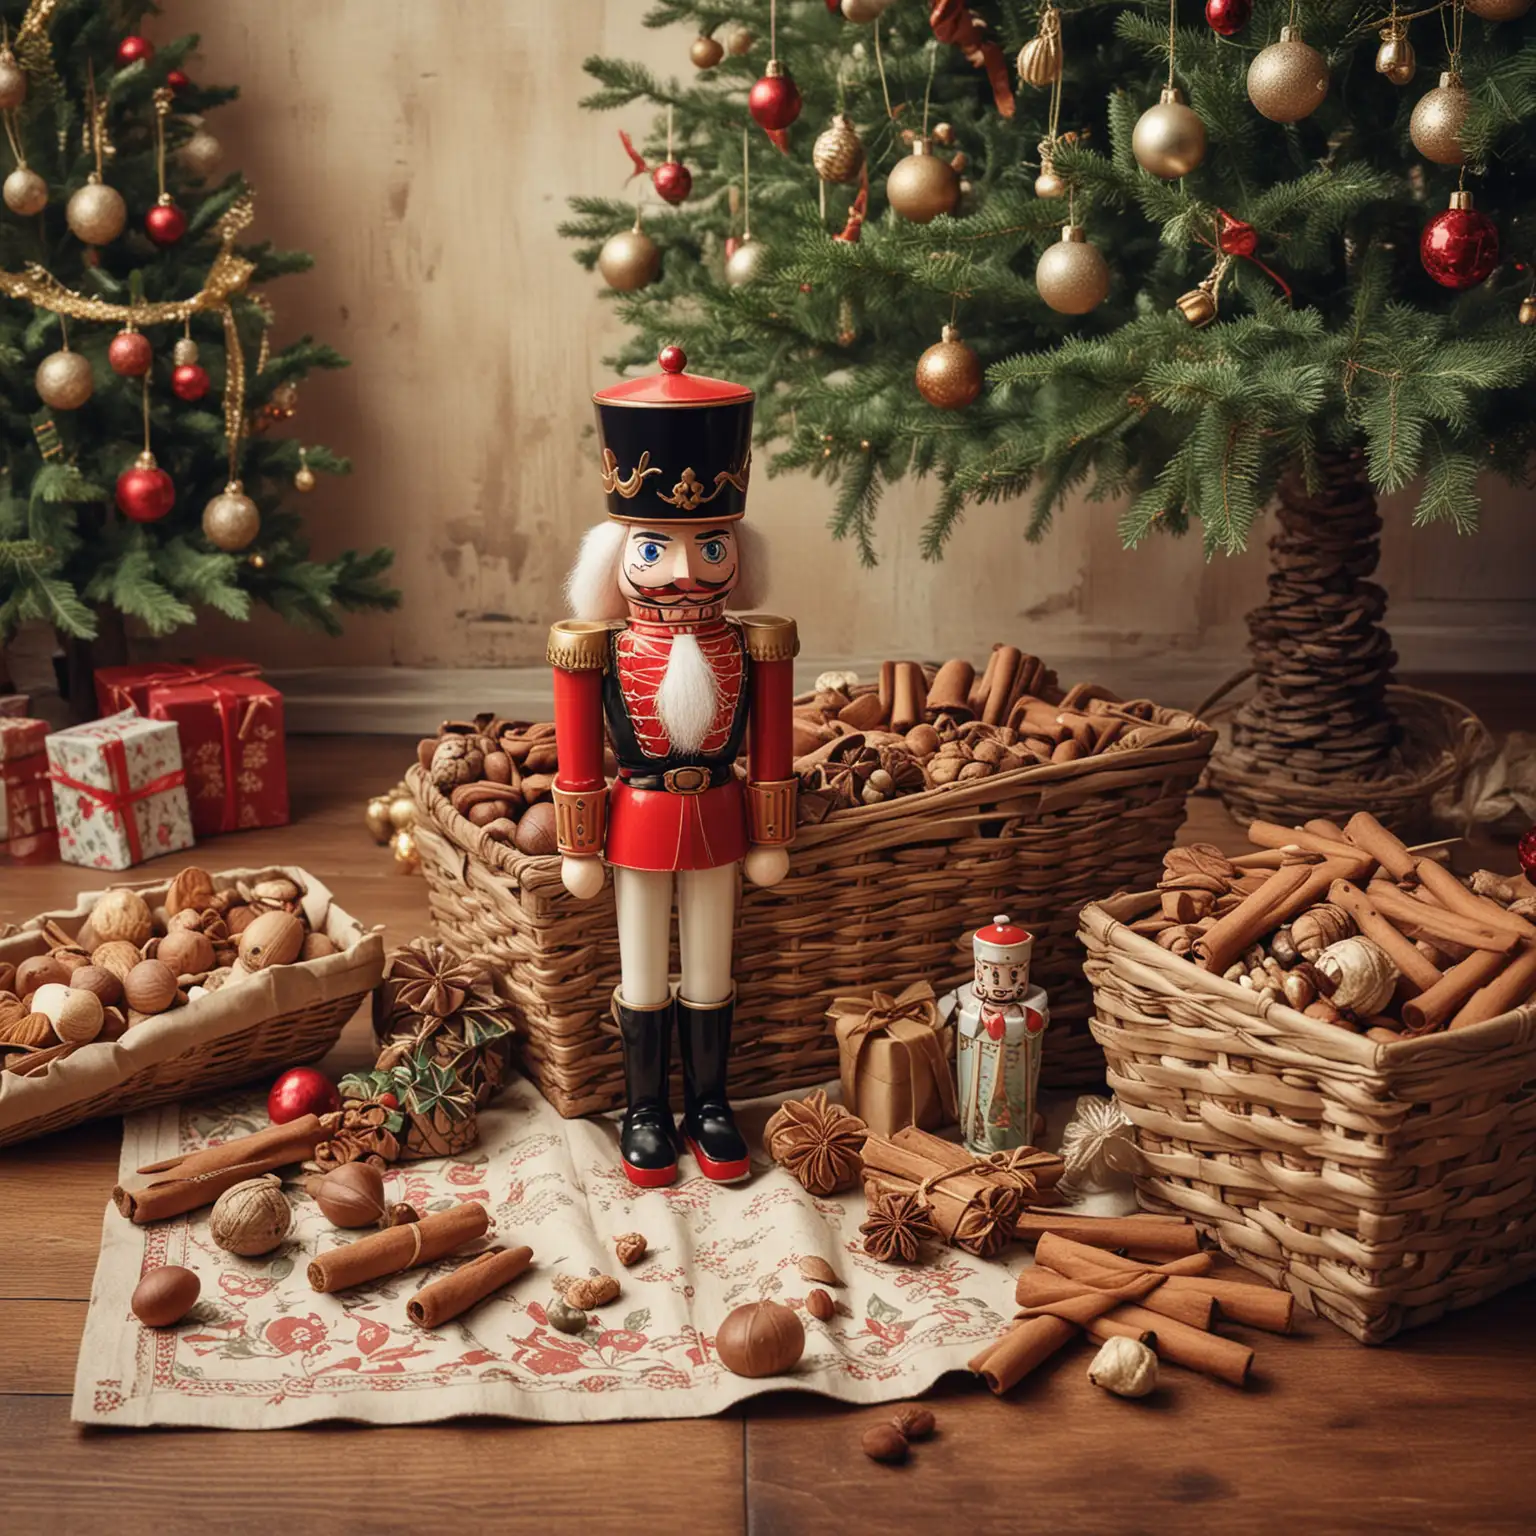 Classic Nutcracker Illustration with Christmas Tree and Gifts